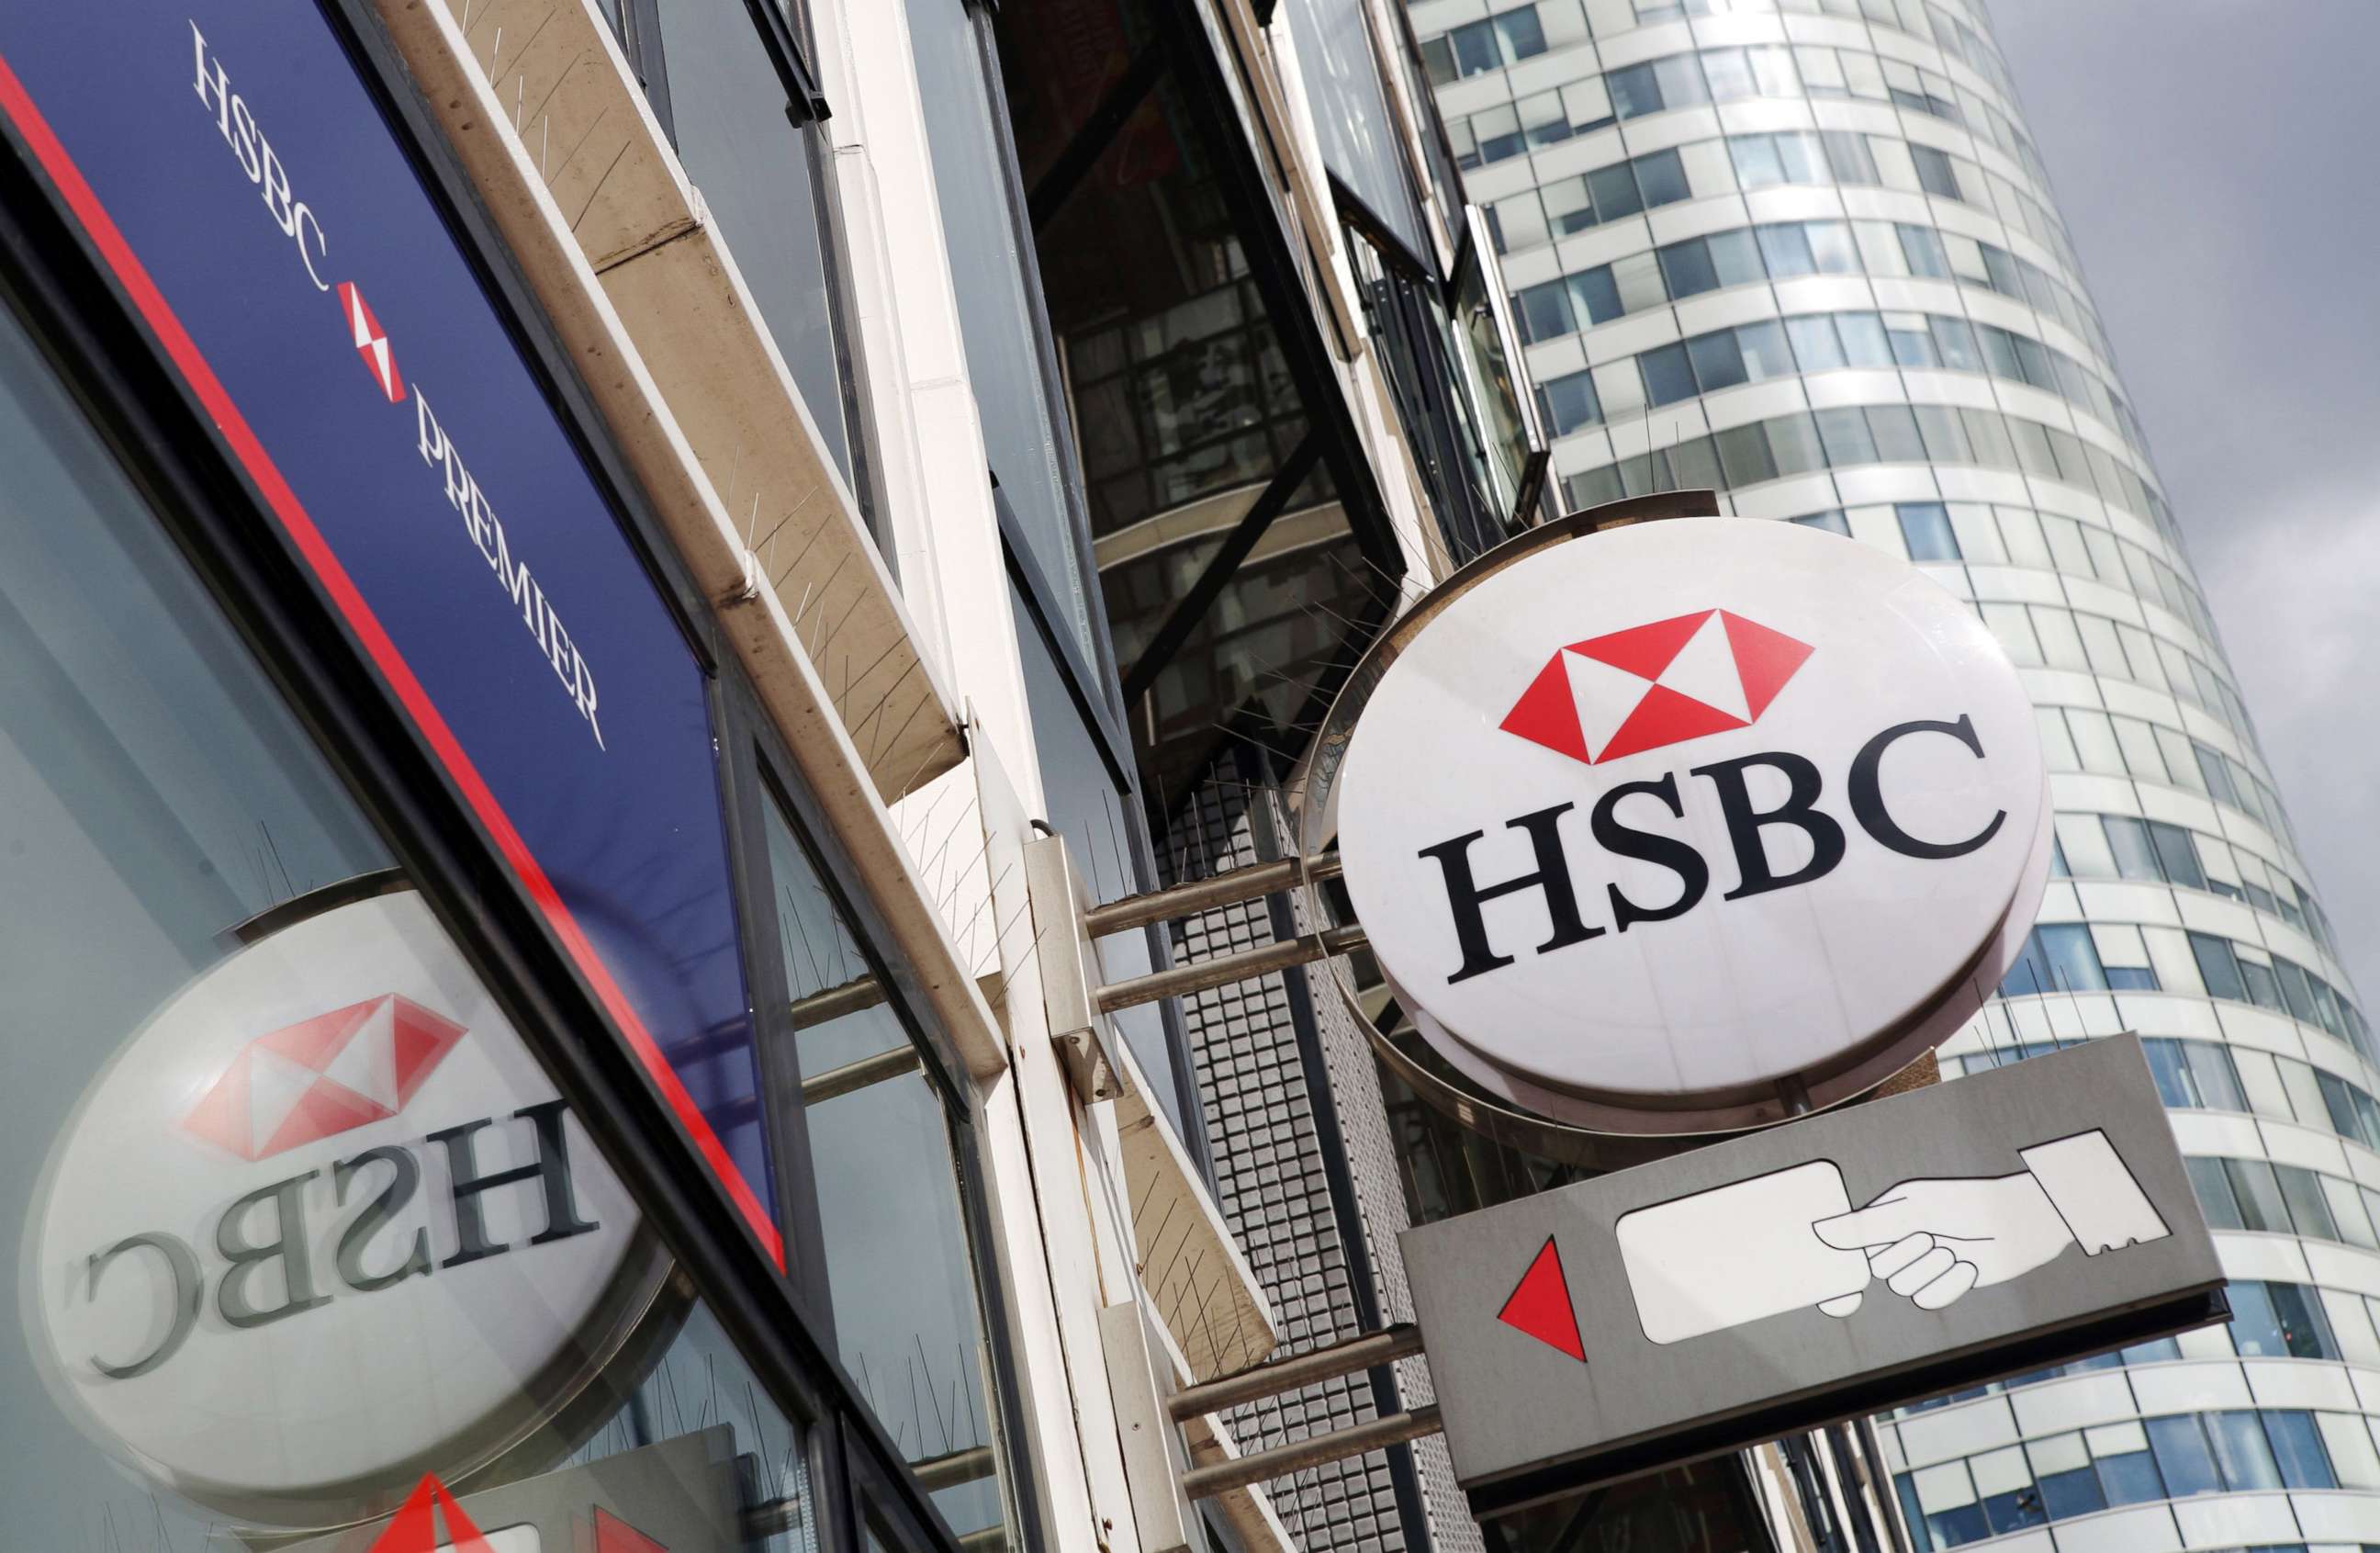 PHOTO: A sign for international banking firm HSBC on a building in the business district of La Defense, on the outskirts of Paris, June 30, 2009.